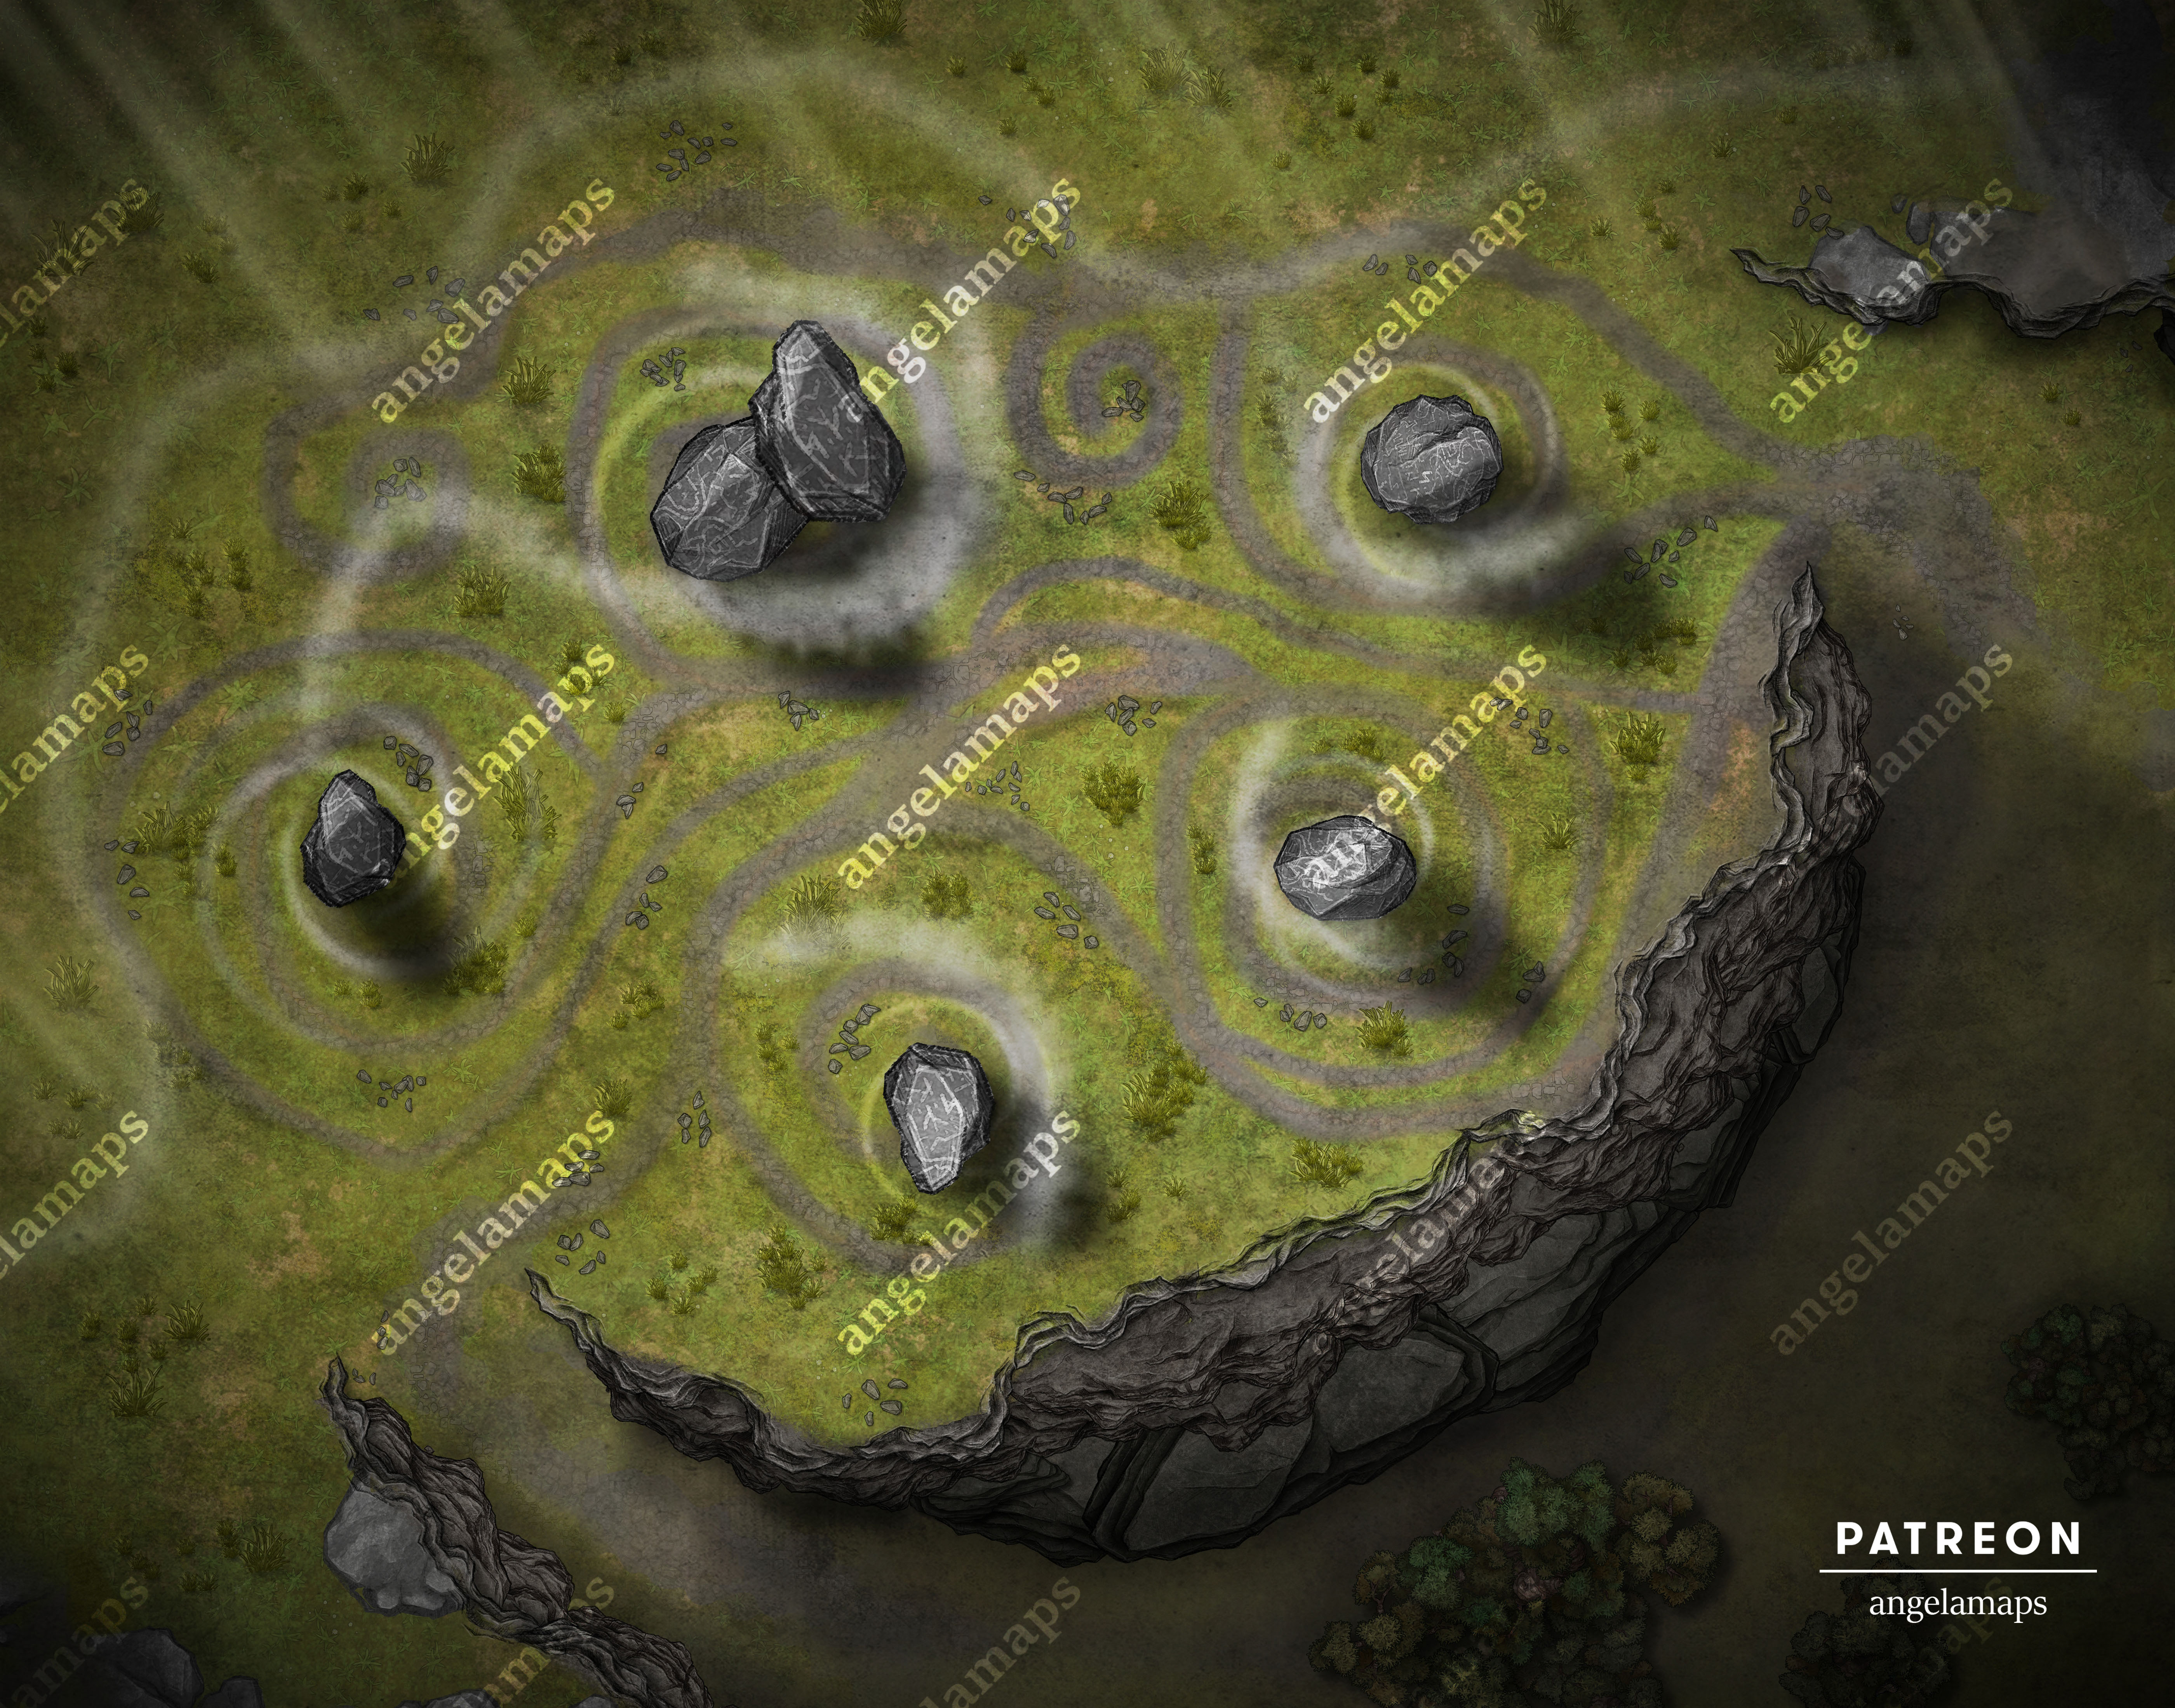 Wind stones magical battle map with the wind element dancing around etched stones.  Animated.